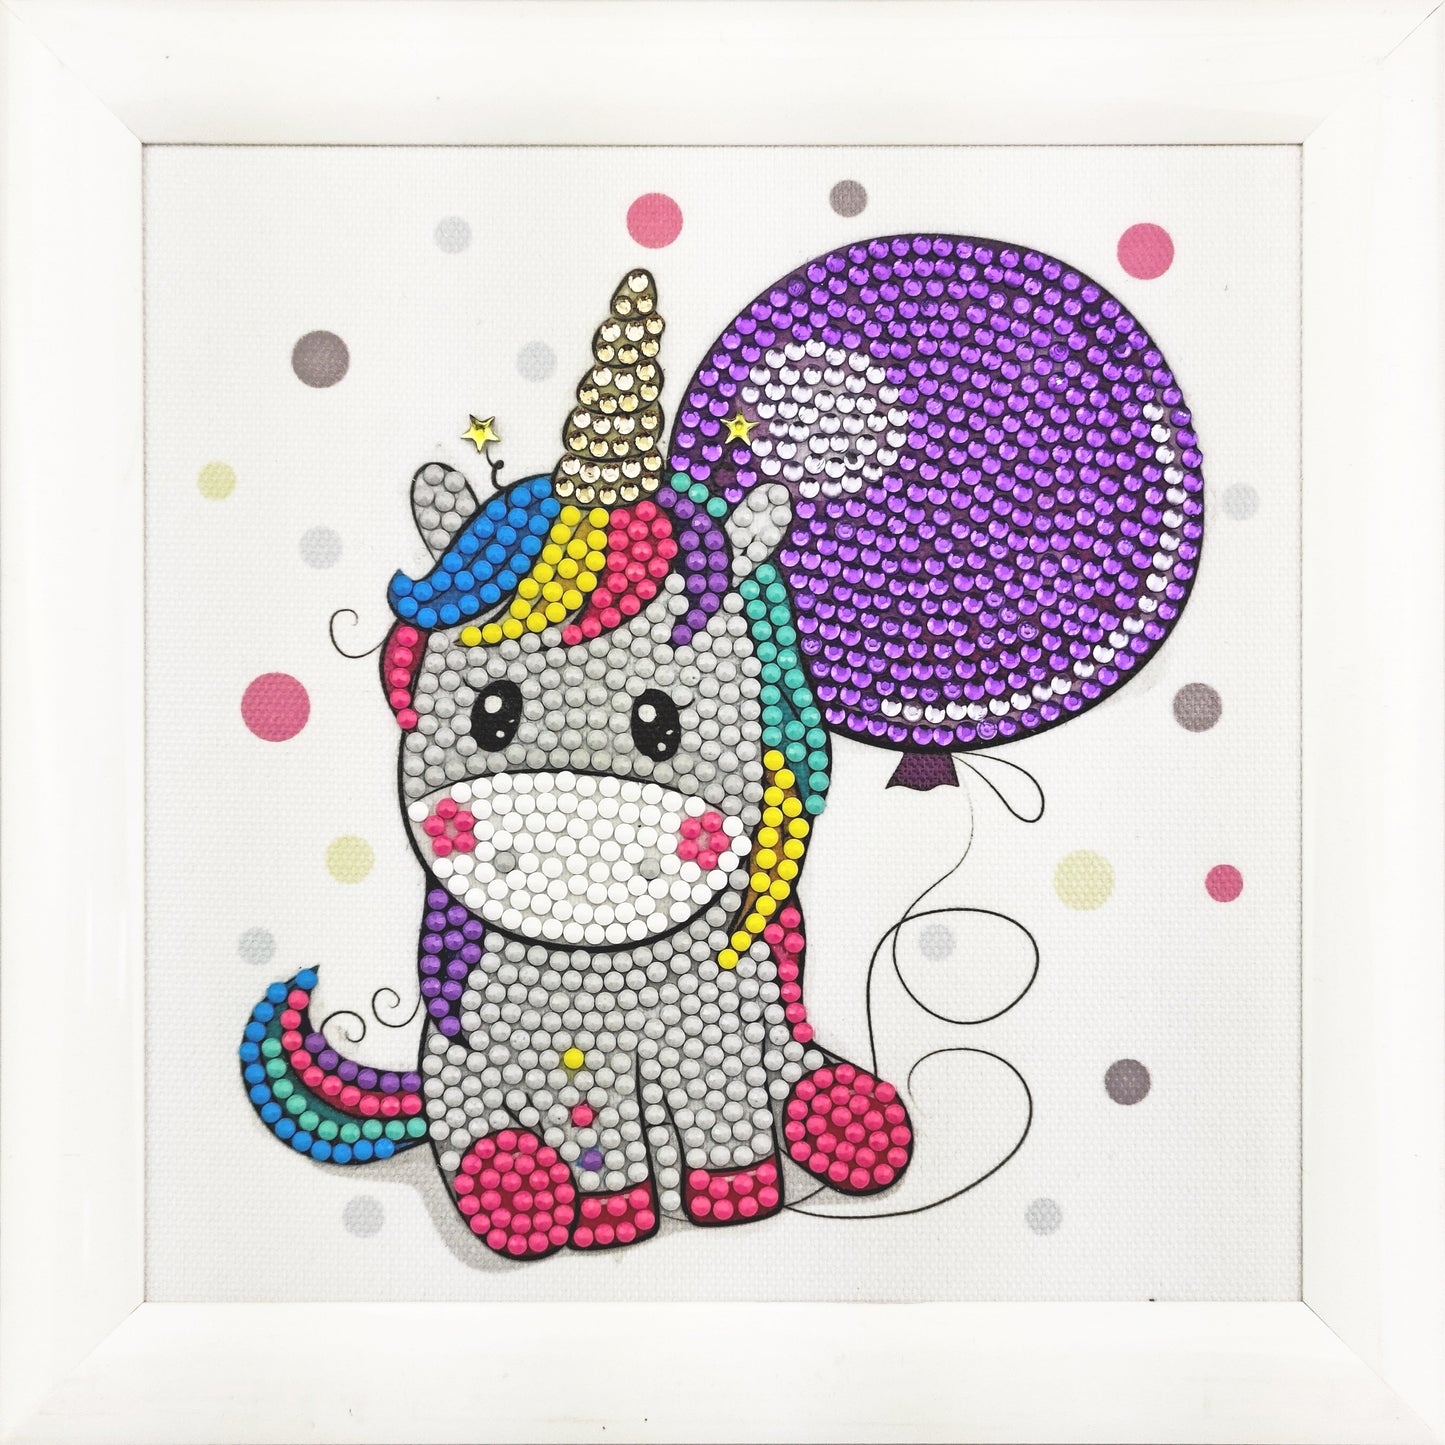 CAFBL-1: "Party Unicorn" Crystal Art Frameables Kit with Picture Frame